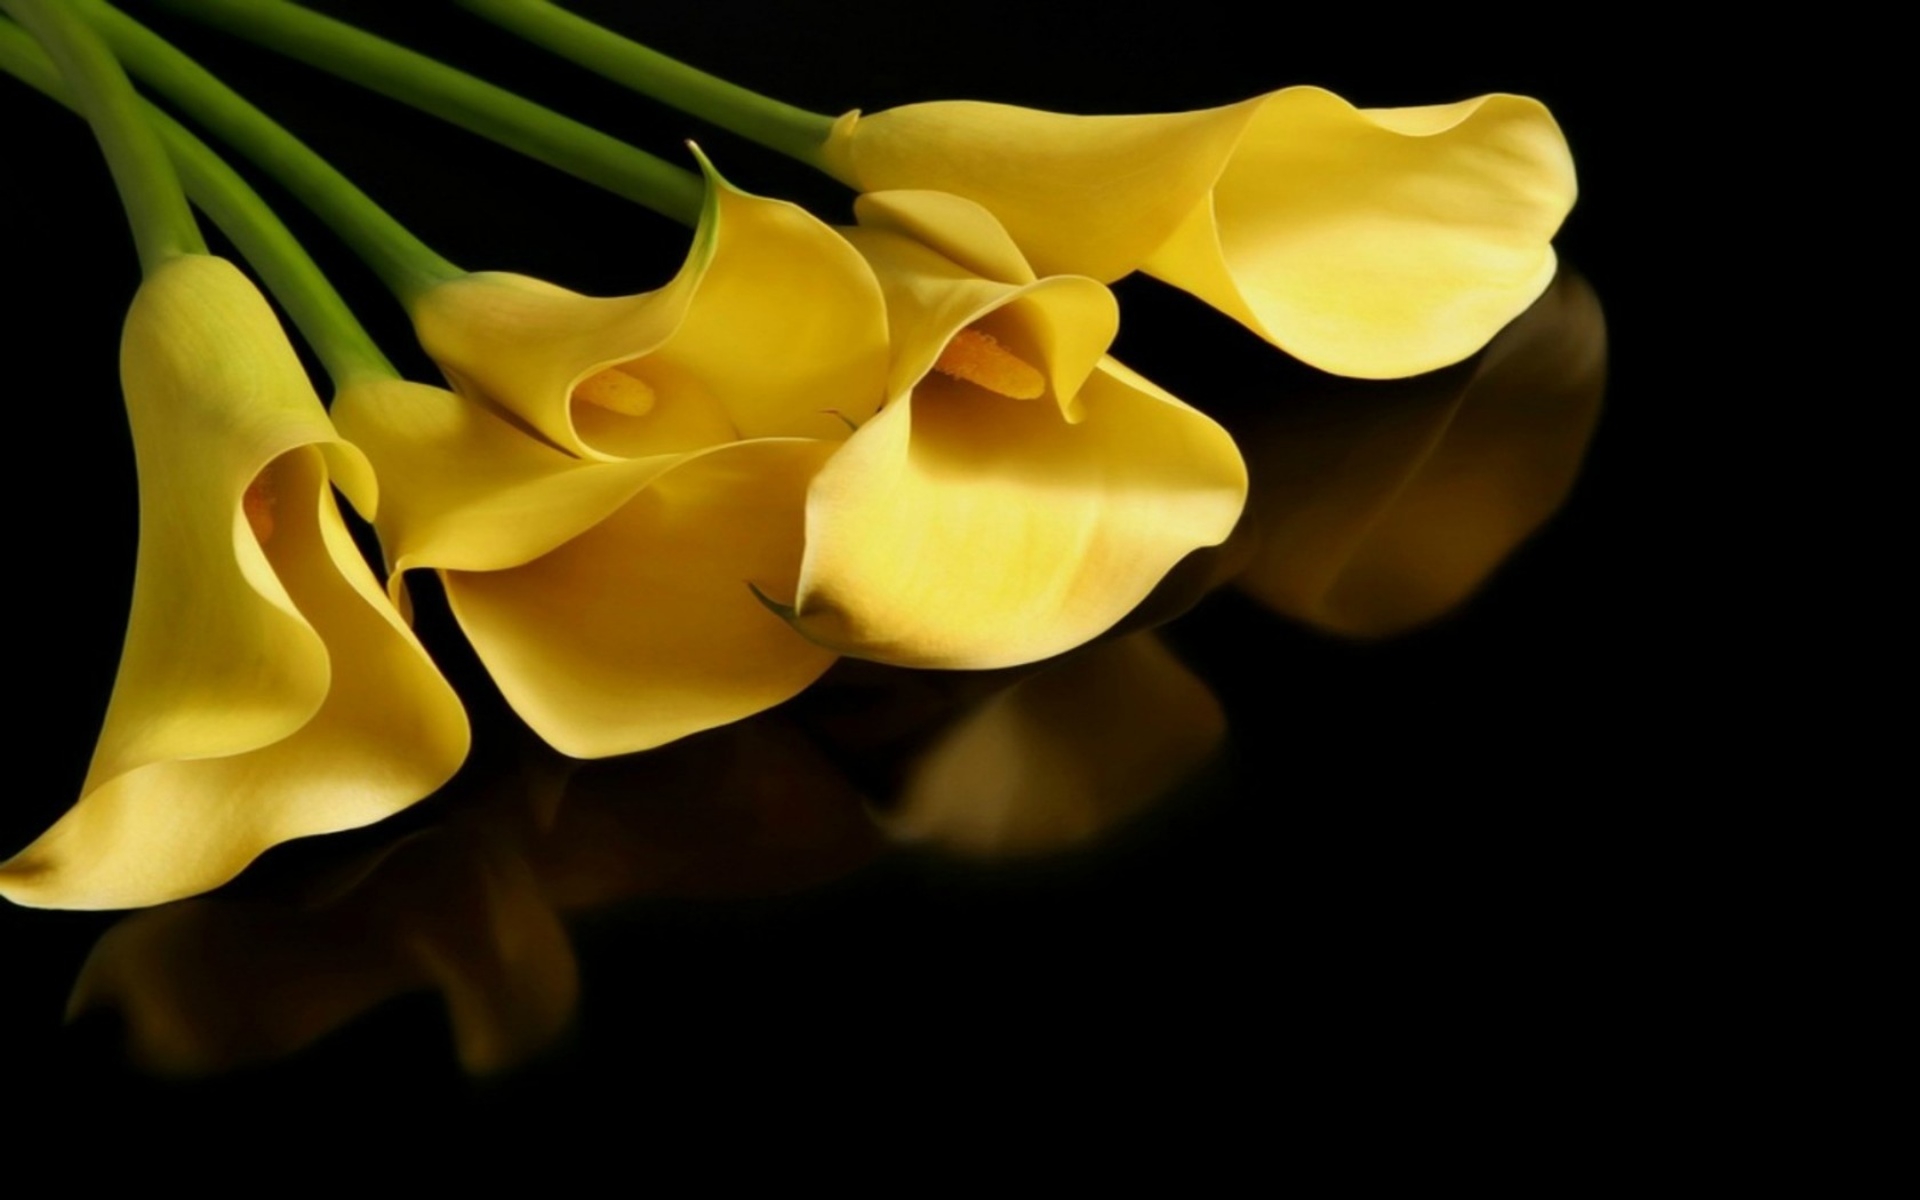 calla lily, earth, flower, yellow flower, flowers wallpaper for mobile